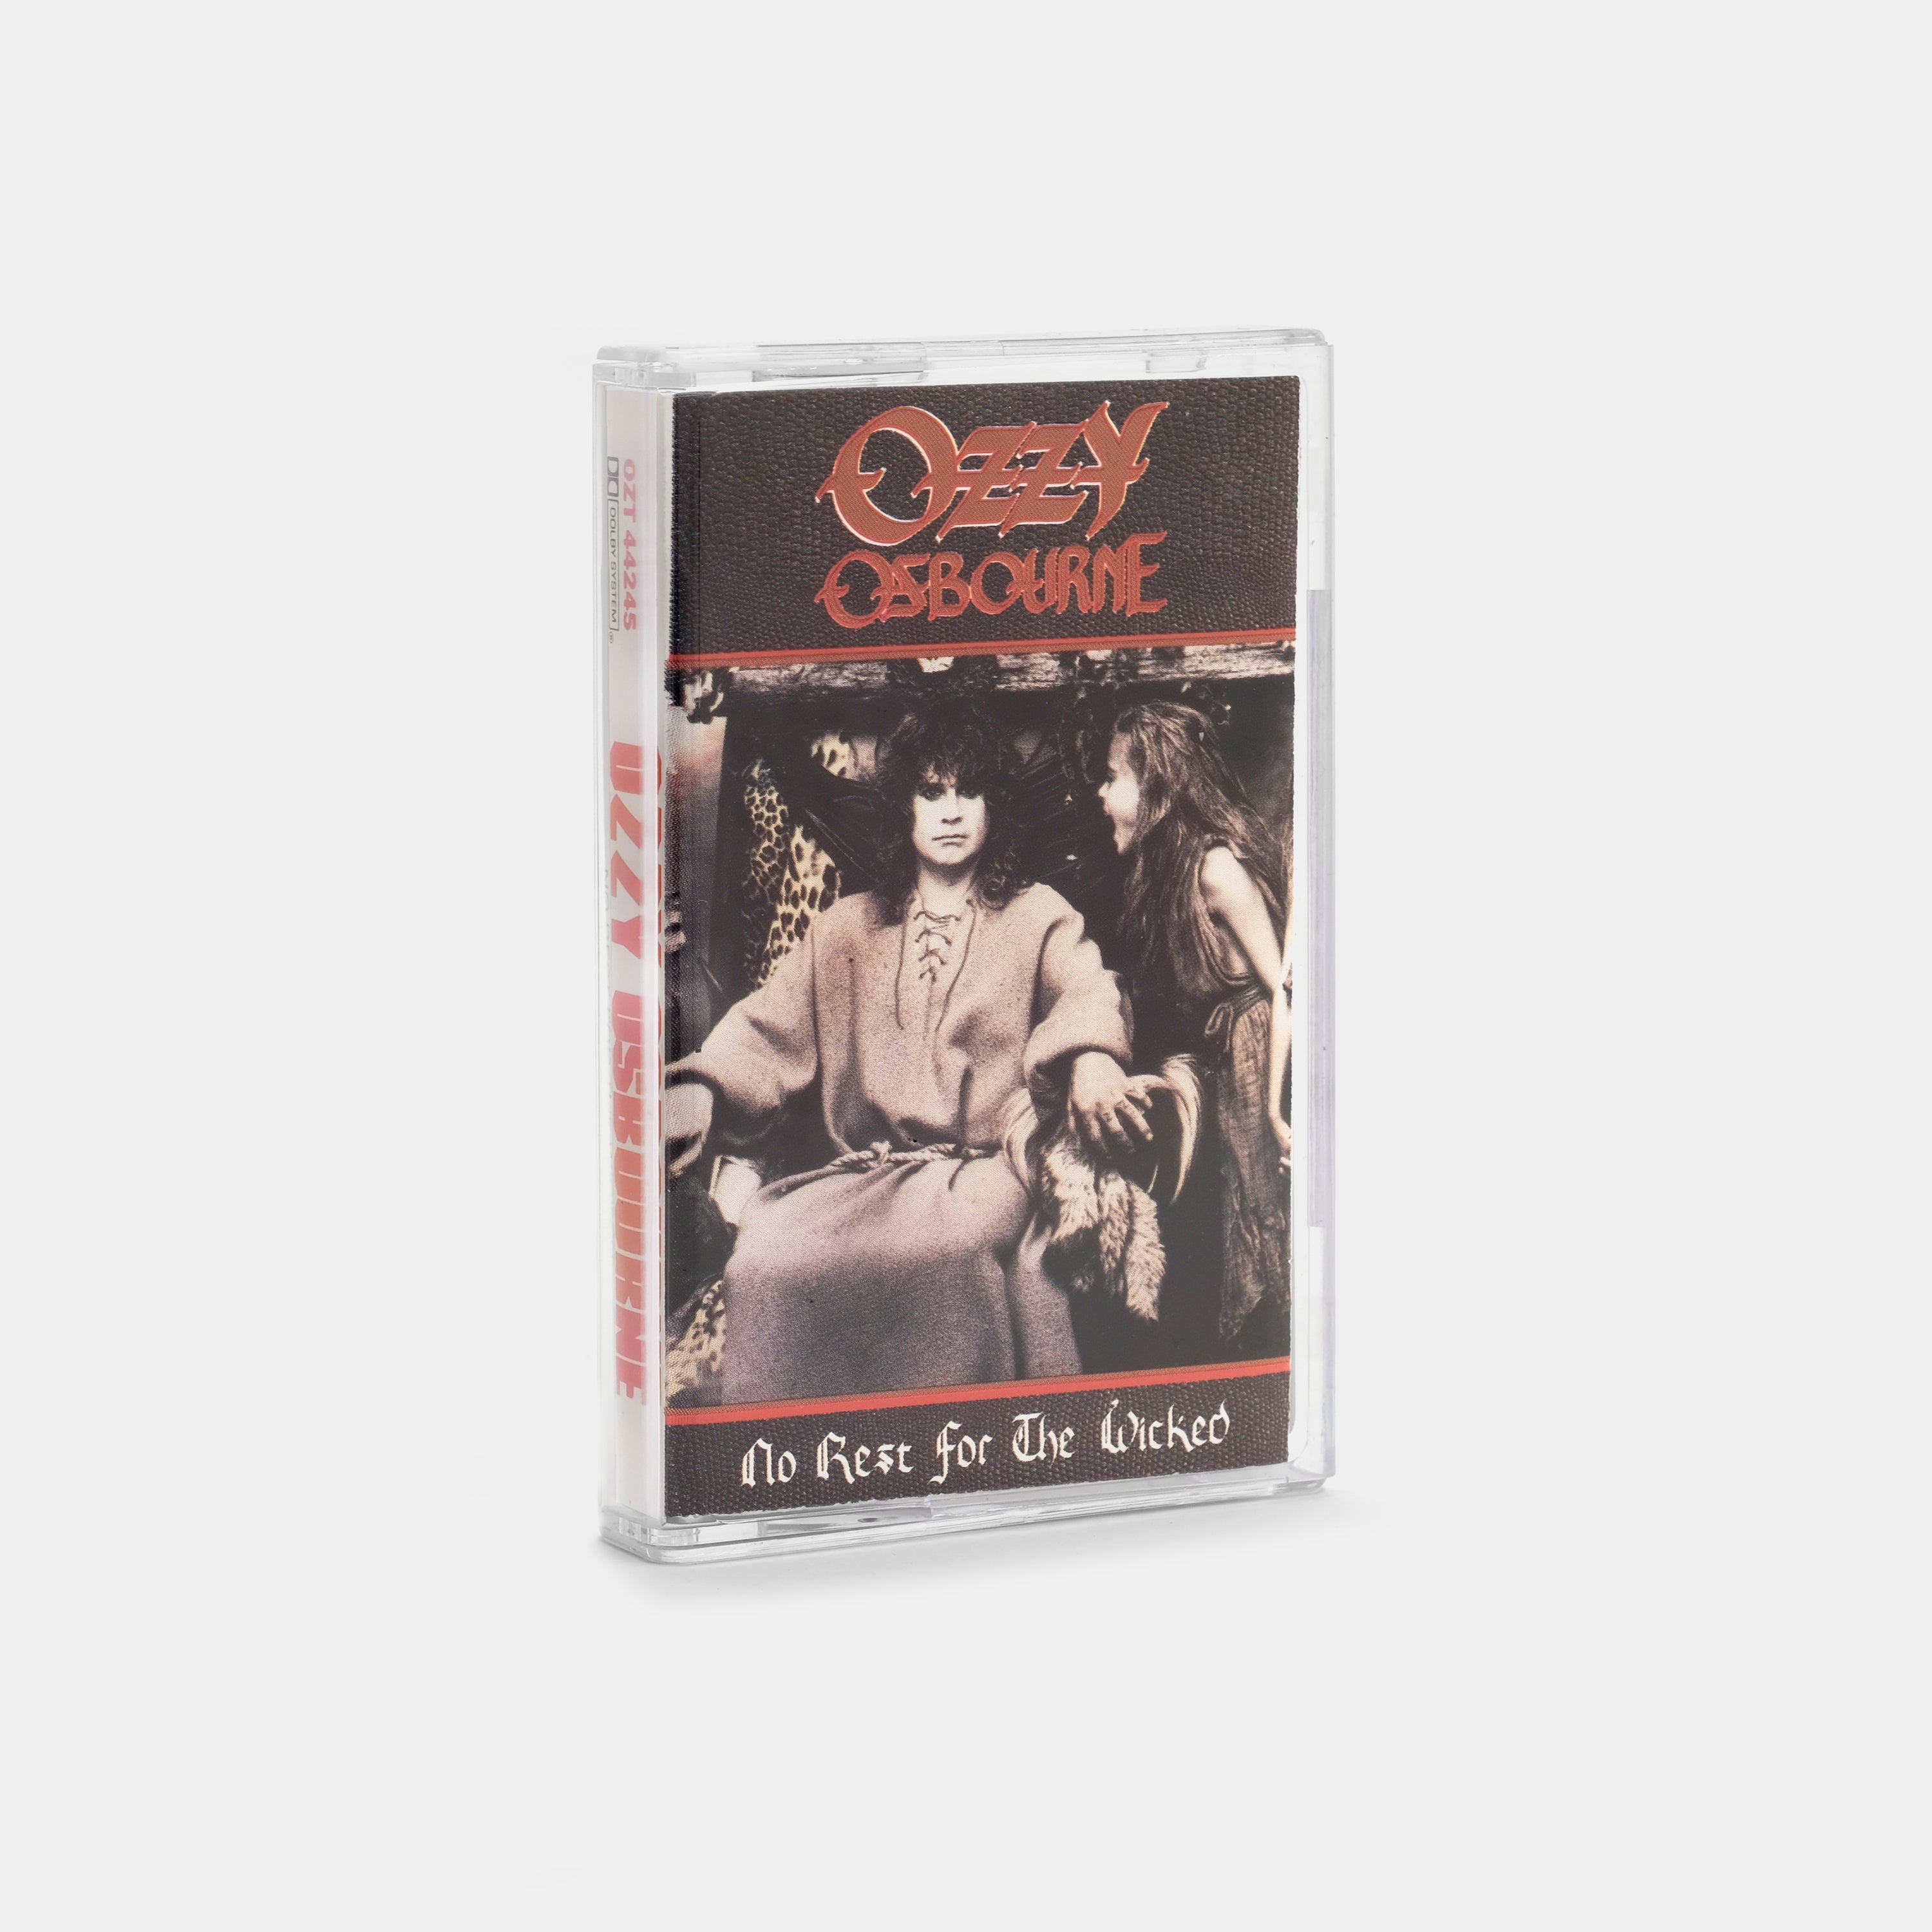 Ozzy Osbourne - No Rest For The Wicked Cassette Tape